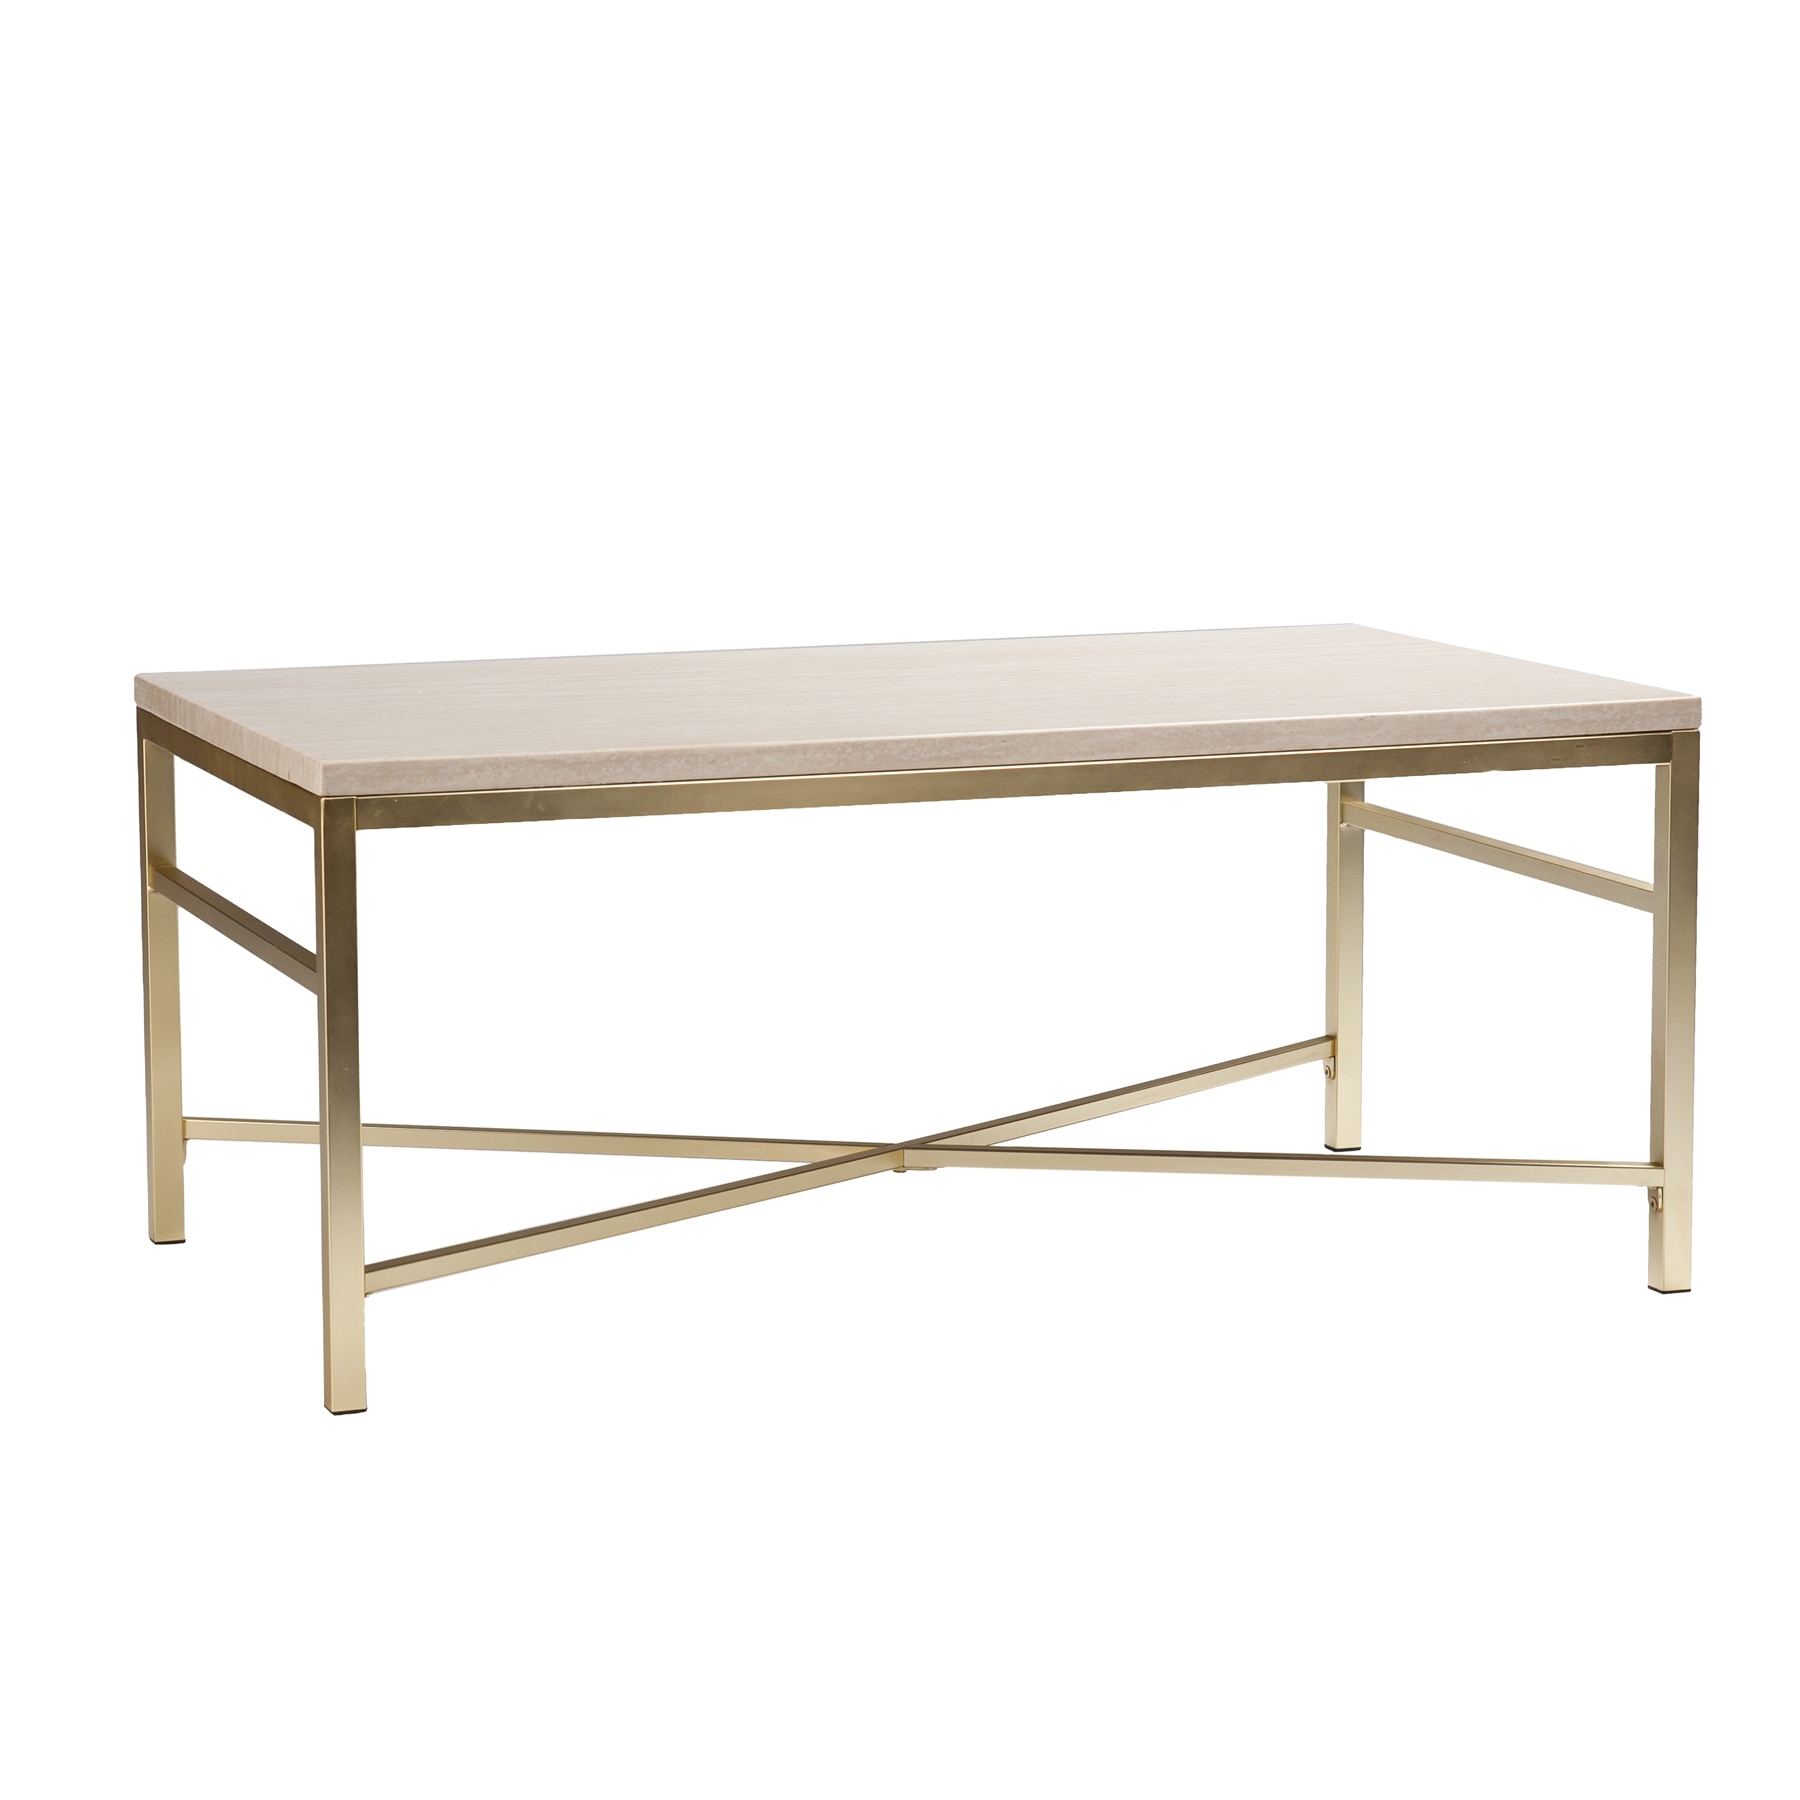 Upton Home Ogden Travertine Faux Stone Coffee/ Cocktail Table - Image 0